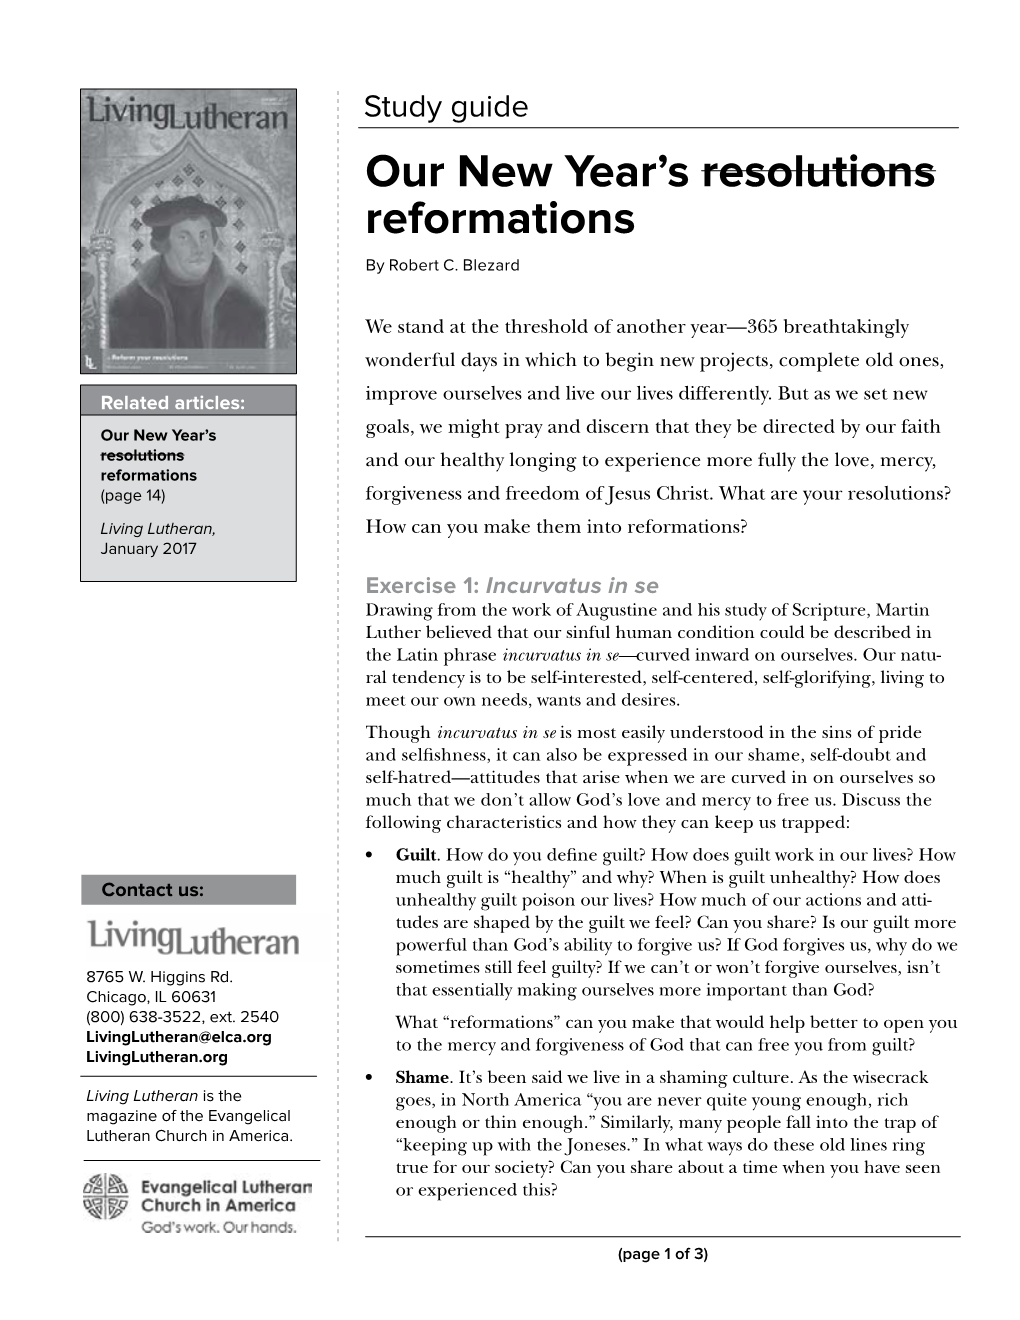 Our New Year's Resolutions Reformations